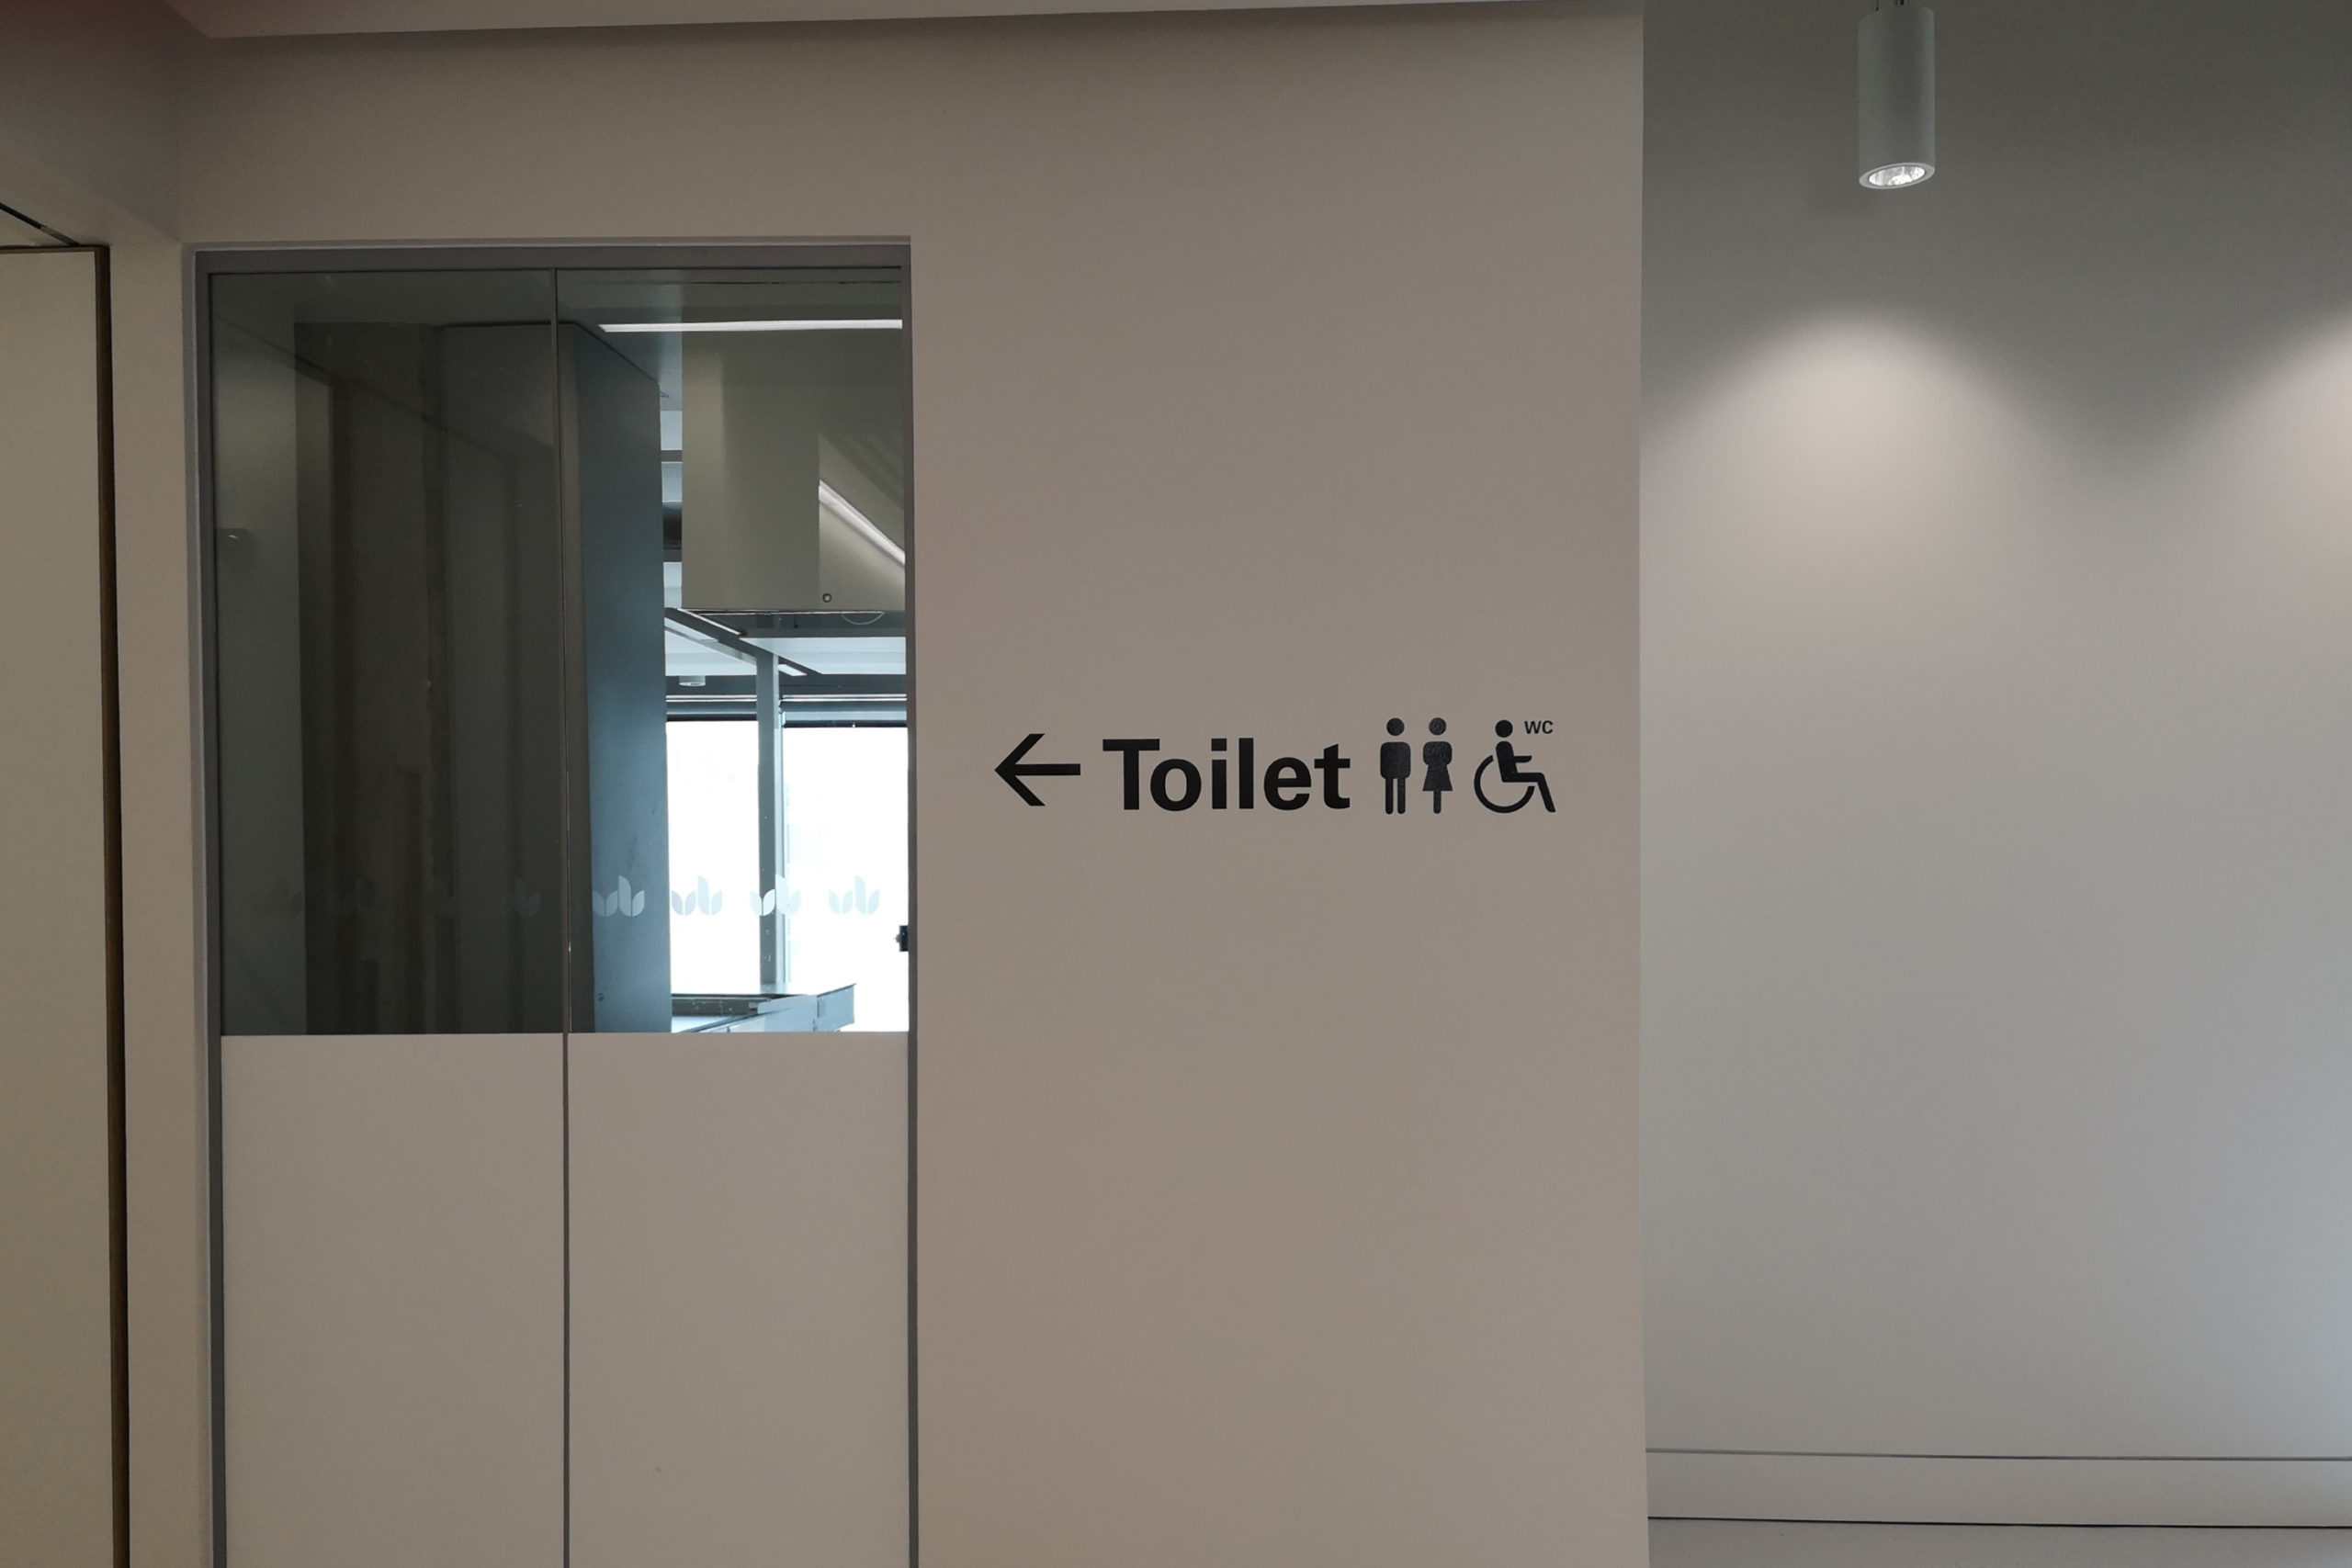 Toilet directional sign